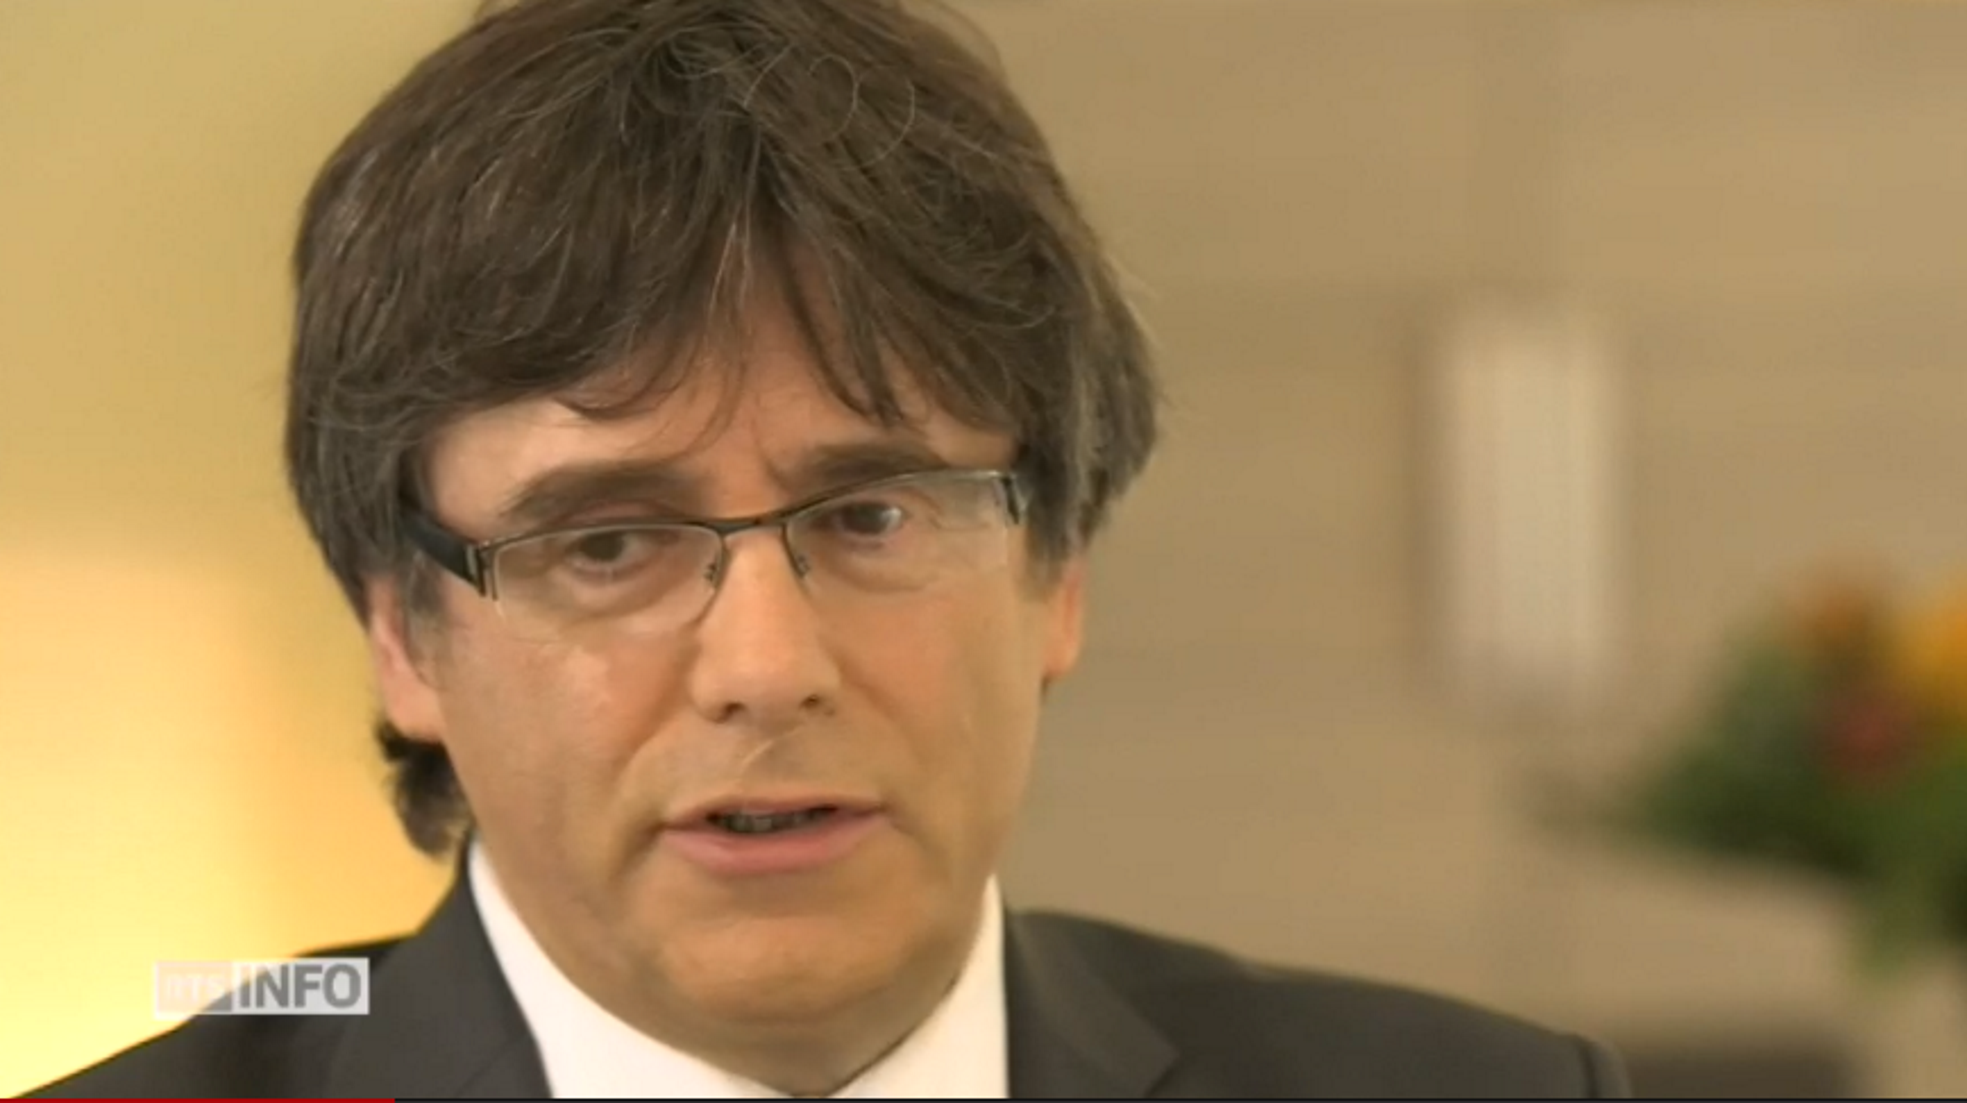 Puigdemont to Swiss TV: "Franco nominated the king's father"